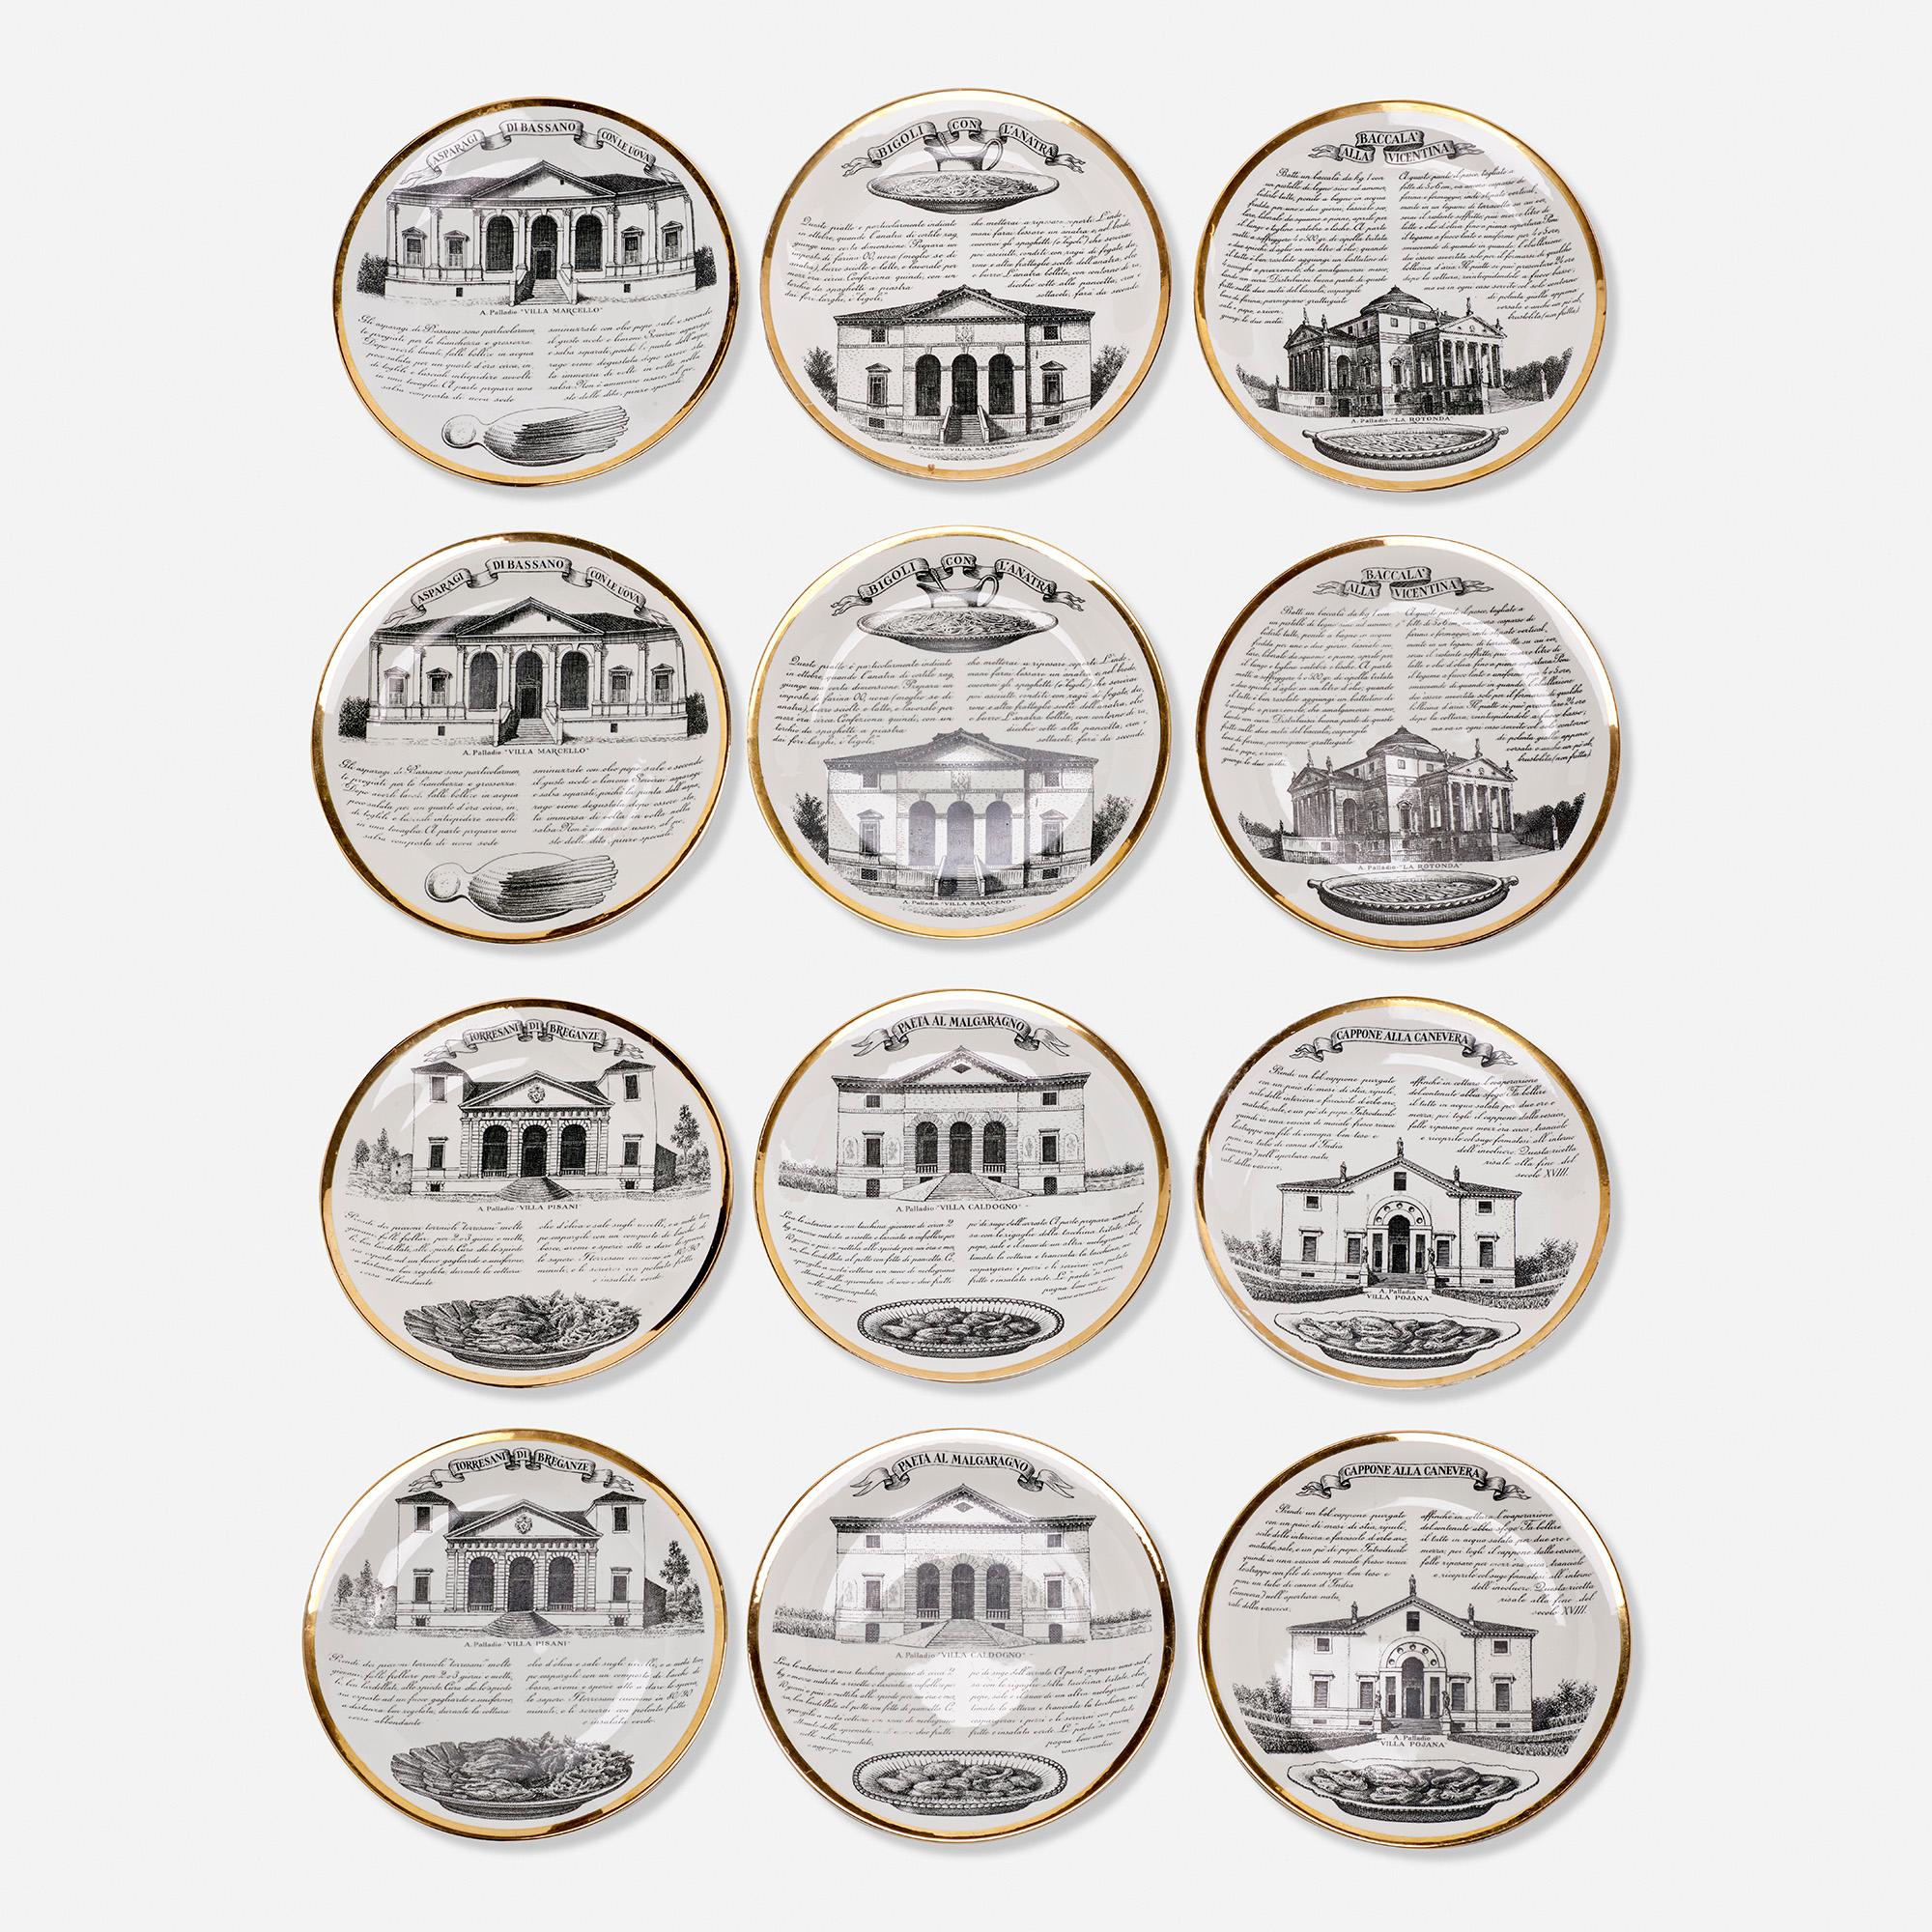 Made by: Fornasetti Milano, Italy, c. 1970

Material: transfer-printed and gilt porcelain

Size: 9.5 diameter in

Description: Stamped manufacturer's mark to verso of each example ‘Specialità Vicentine Fornasetti Milano Made in Italy’ and